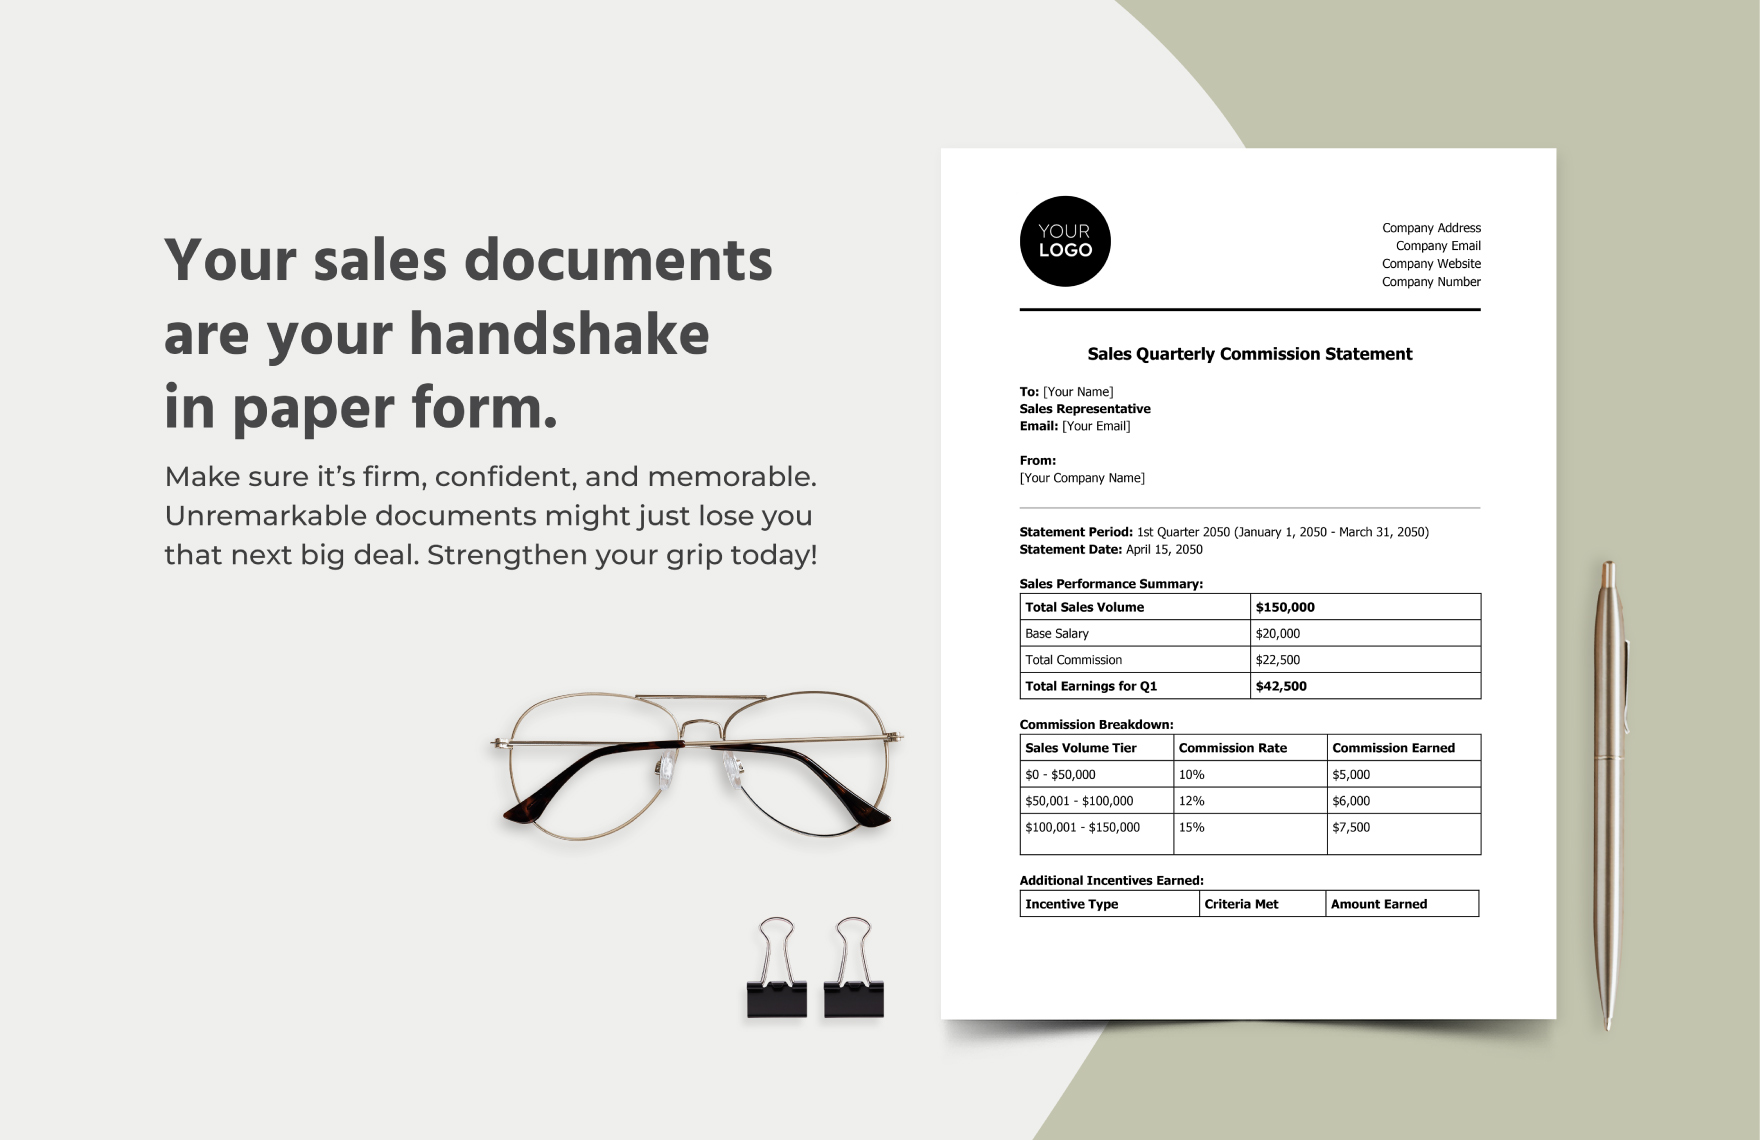 Sales Quarterly Commission Statement Template